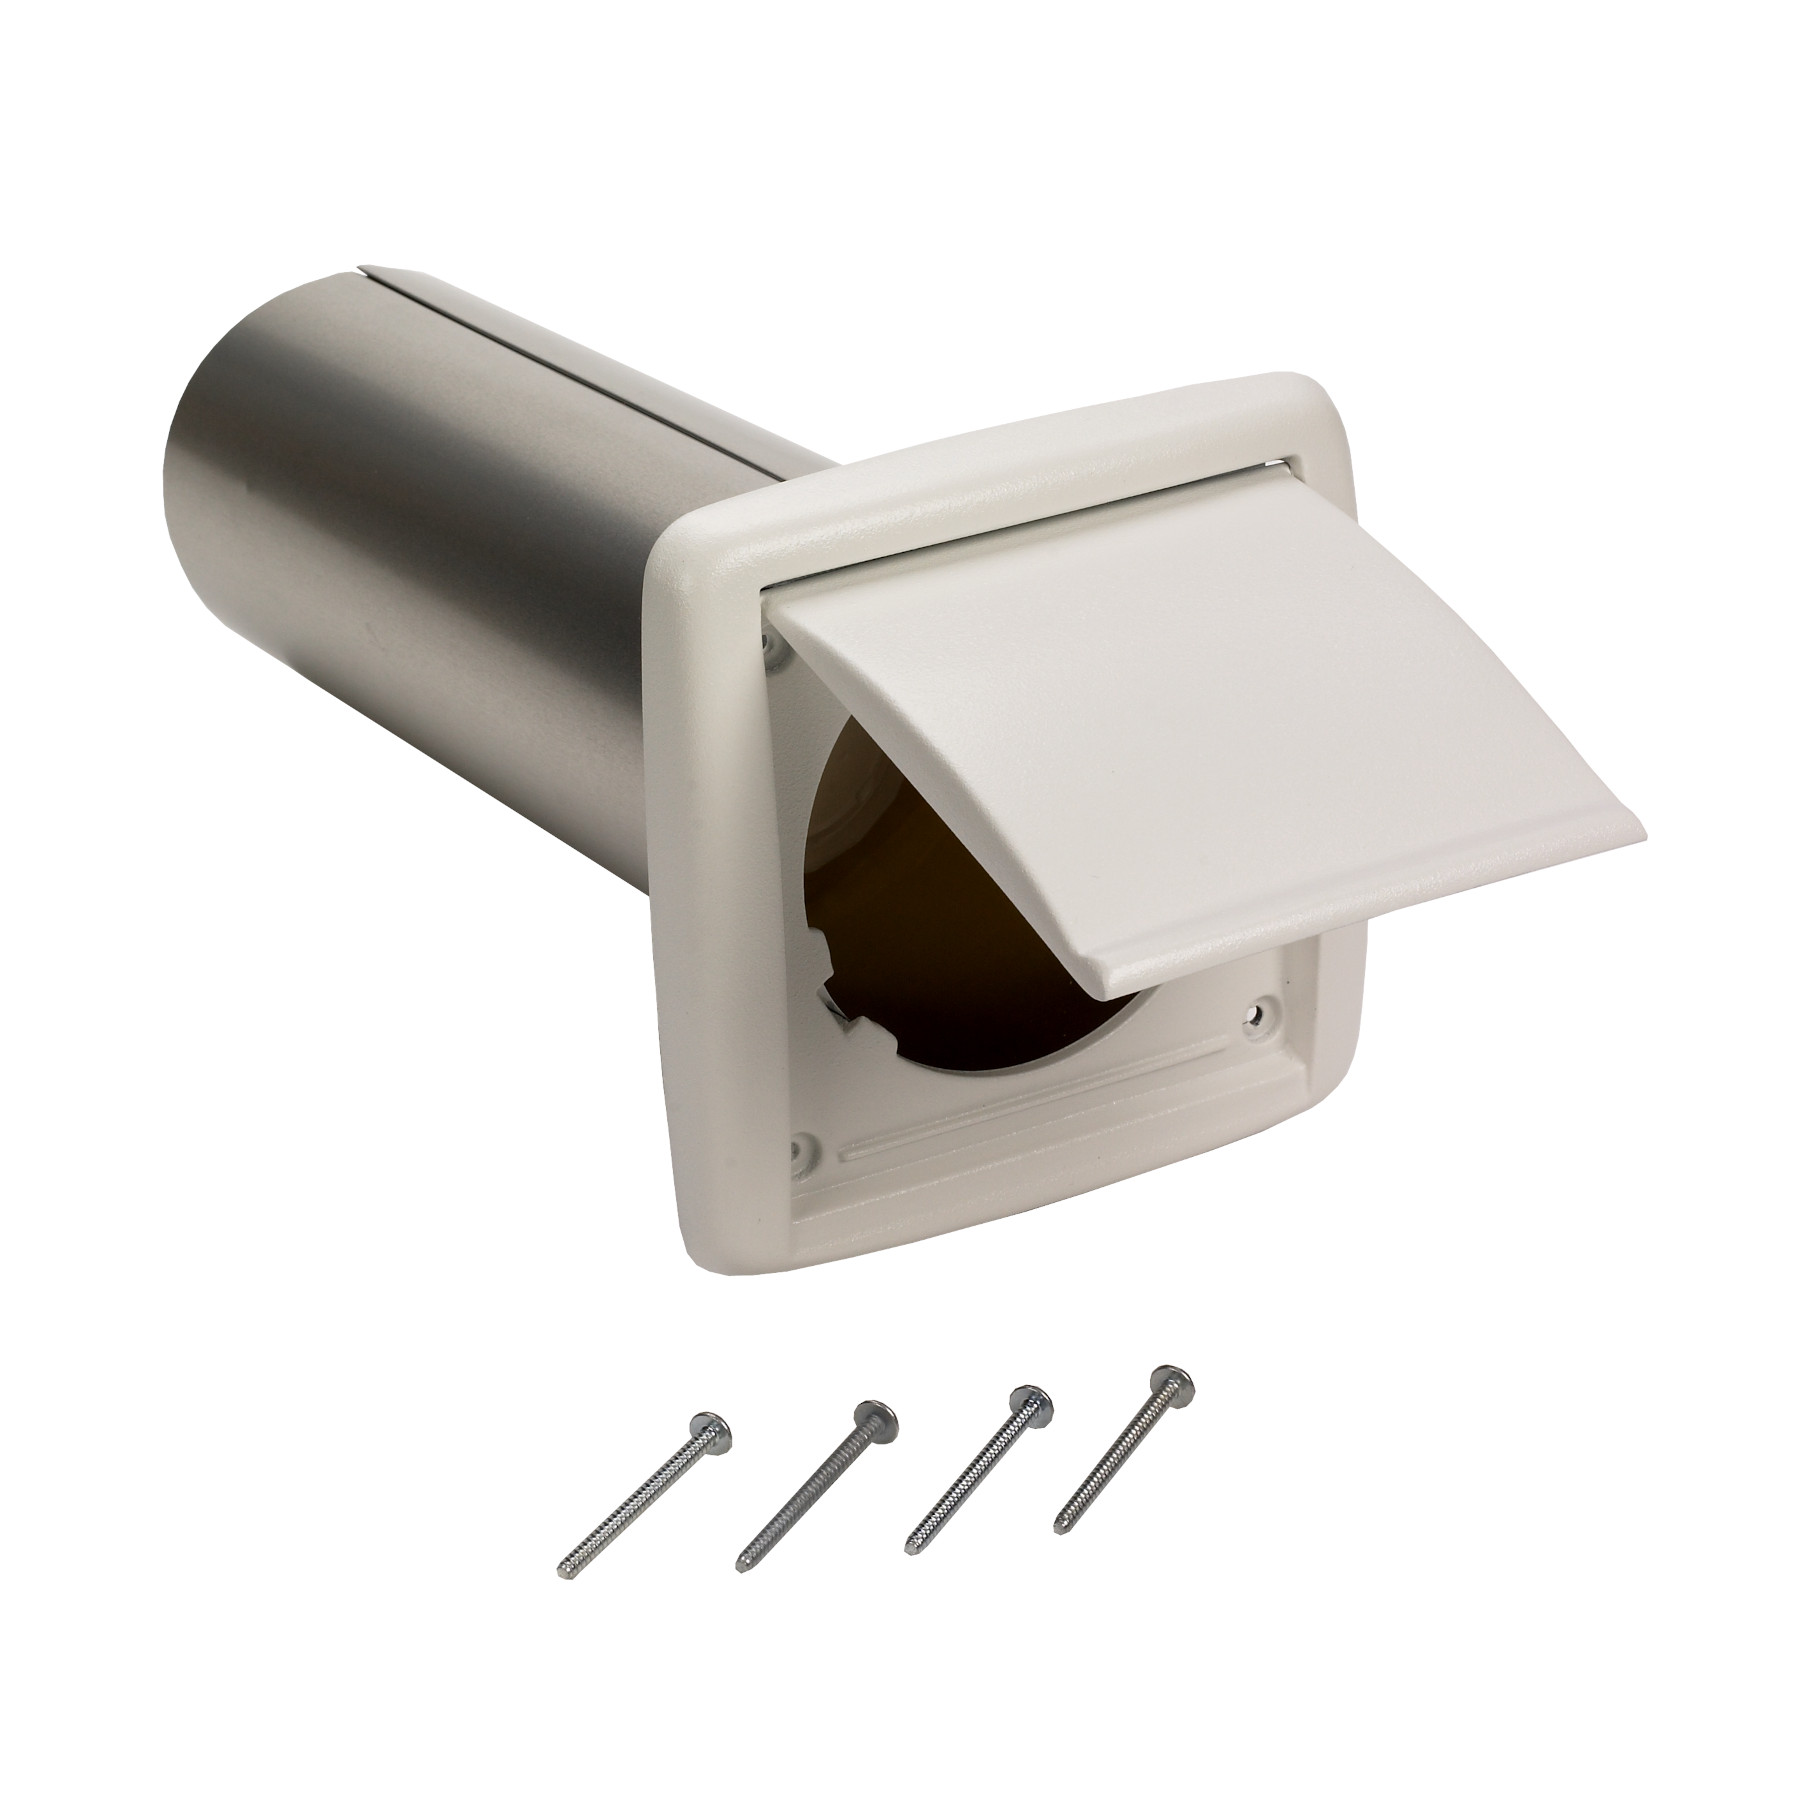 BROAN-NUTONE LLC WVK2A Wall Vent Kit - image 2 of 4